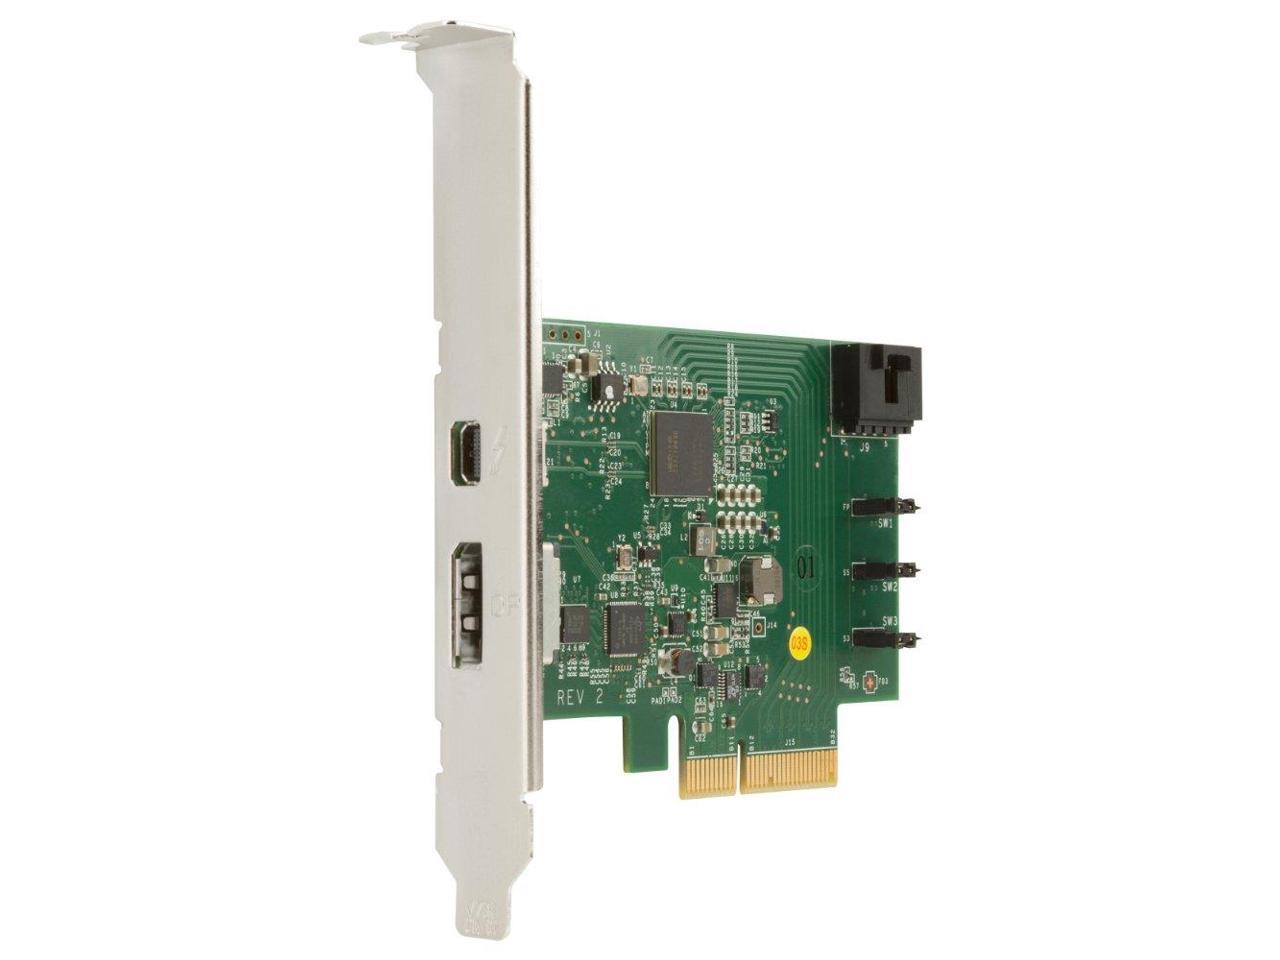 HP 1-port Thunderbolt Adapter with DisplayPort Input - PCI Express - Plug-in Card - 1 Thunderbolt Port(s)